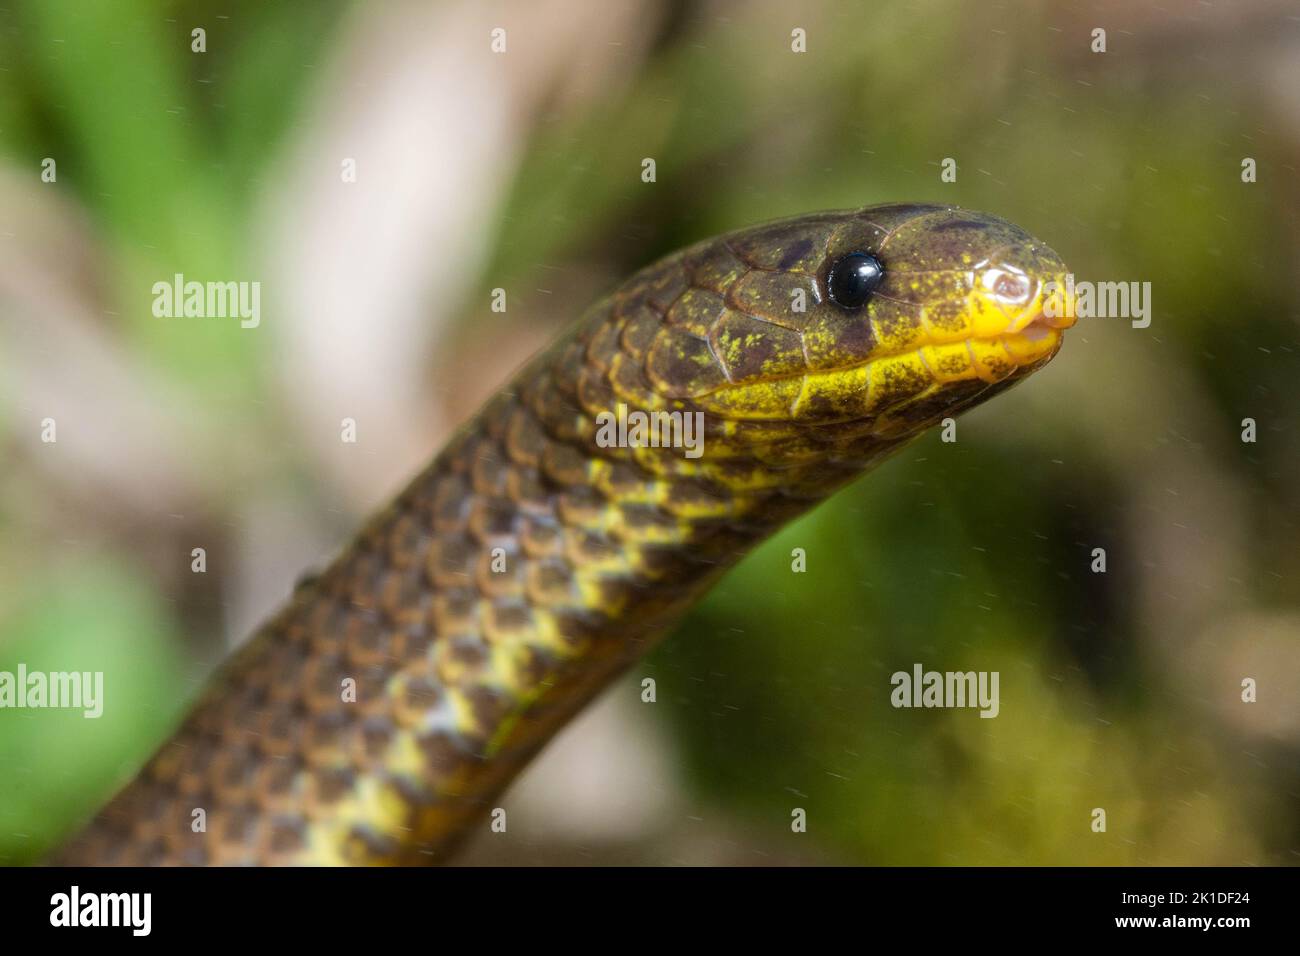 Sabin's ground snake (Atractus michaelsabini ) a new species of snake discovered in 2022 in Southern Ecuador in South America. Stock Photo